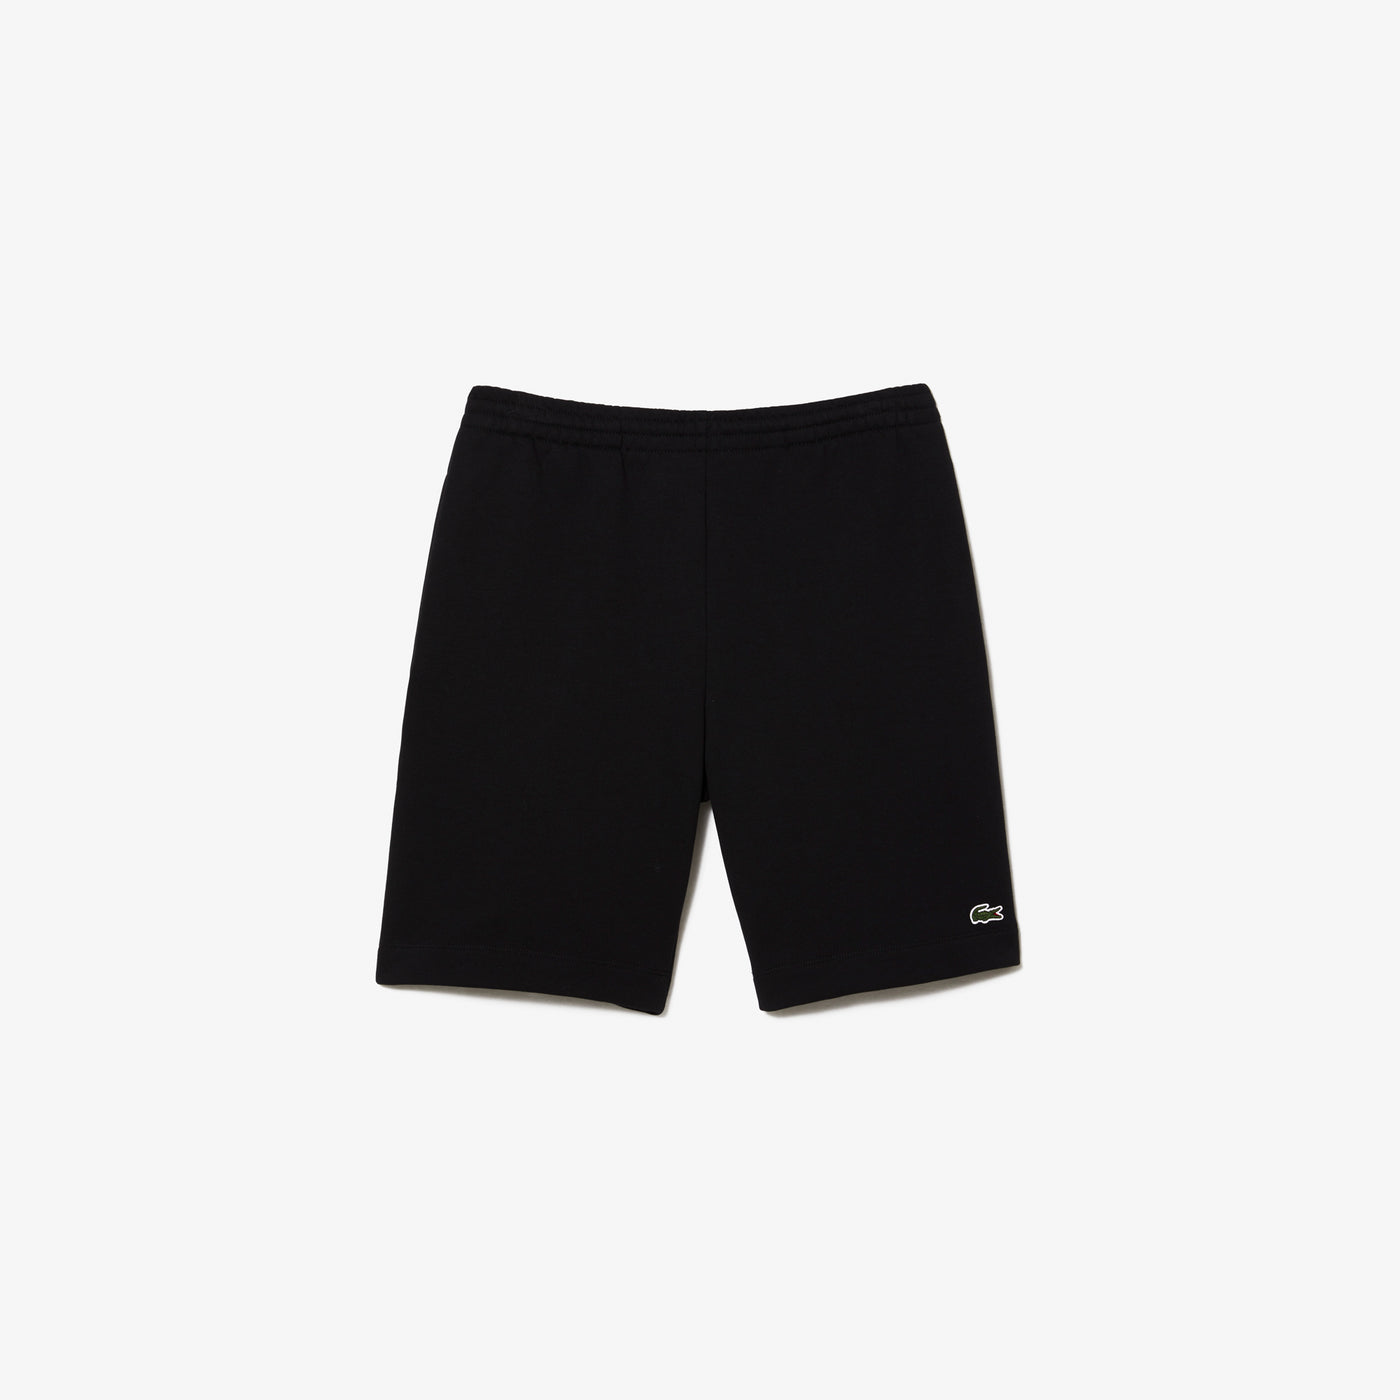 Shop The Latest Collection Of Lacoste Men'S Lacoste Organic Brushed Cotton Fleece Shorts - Gh9627 In Lebanon